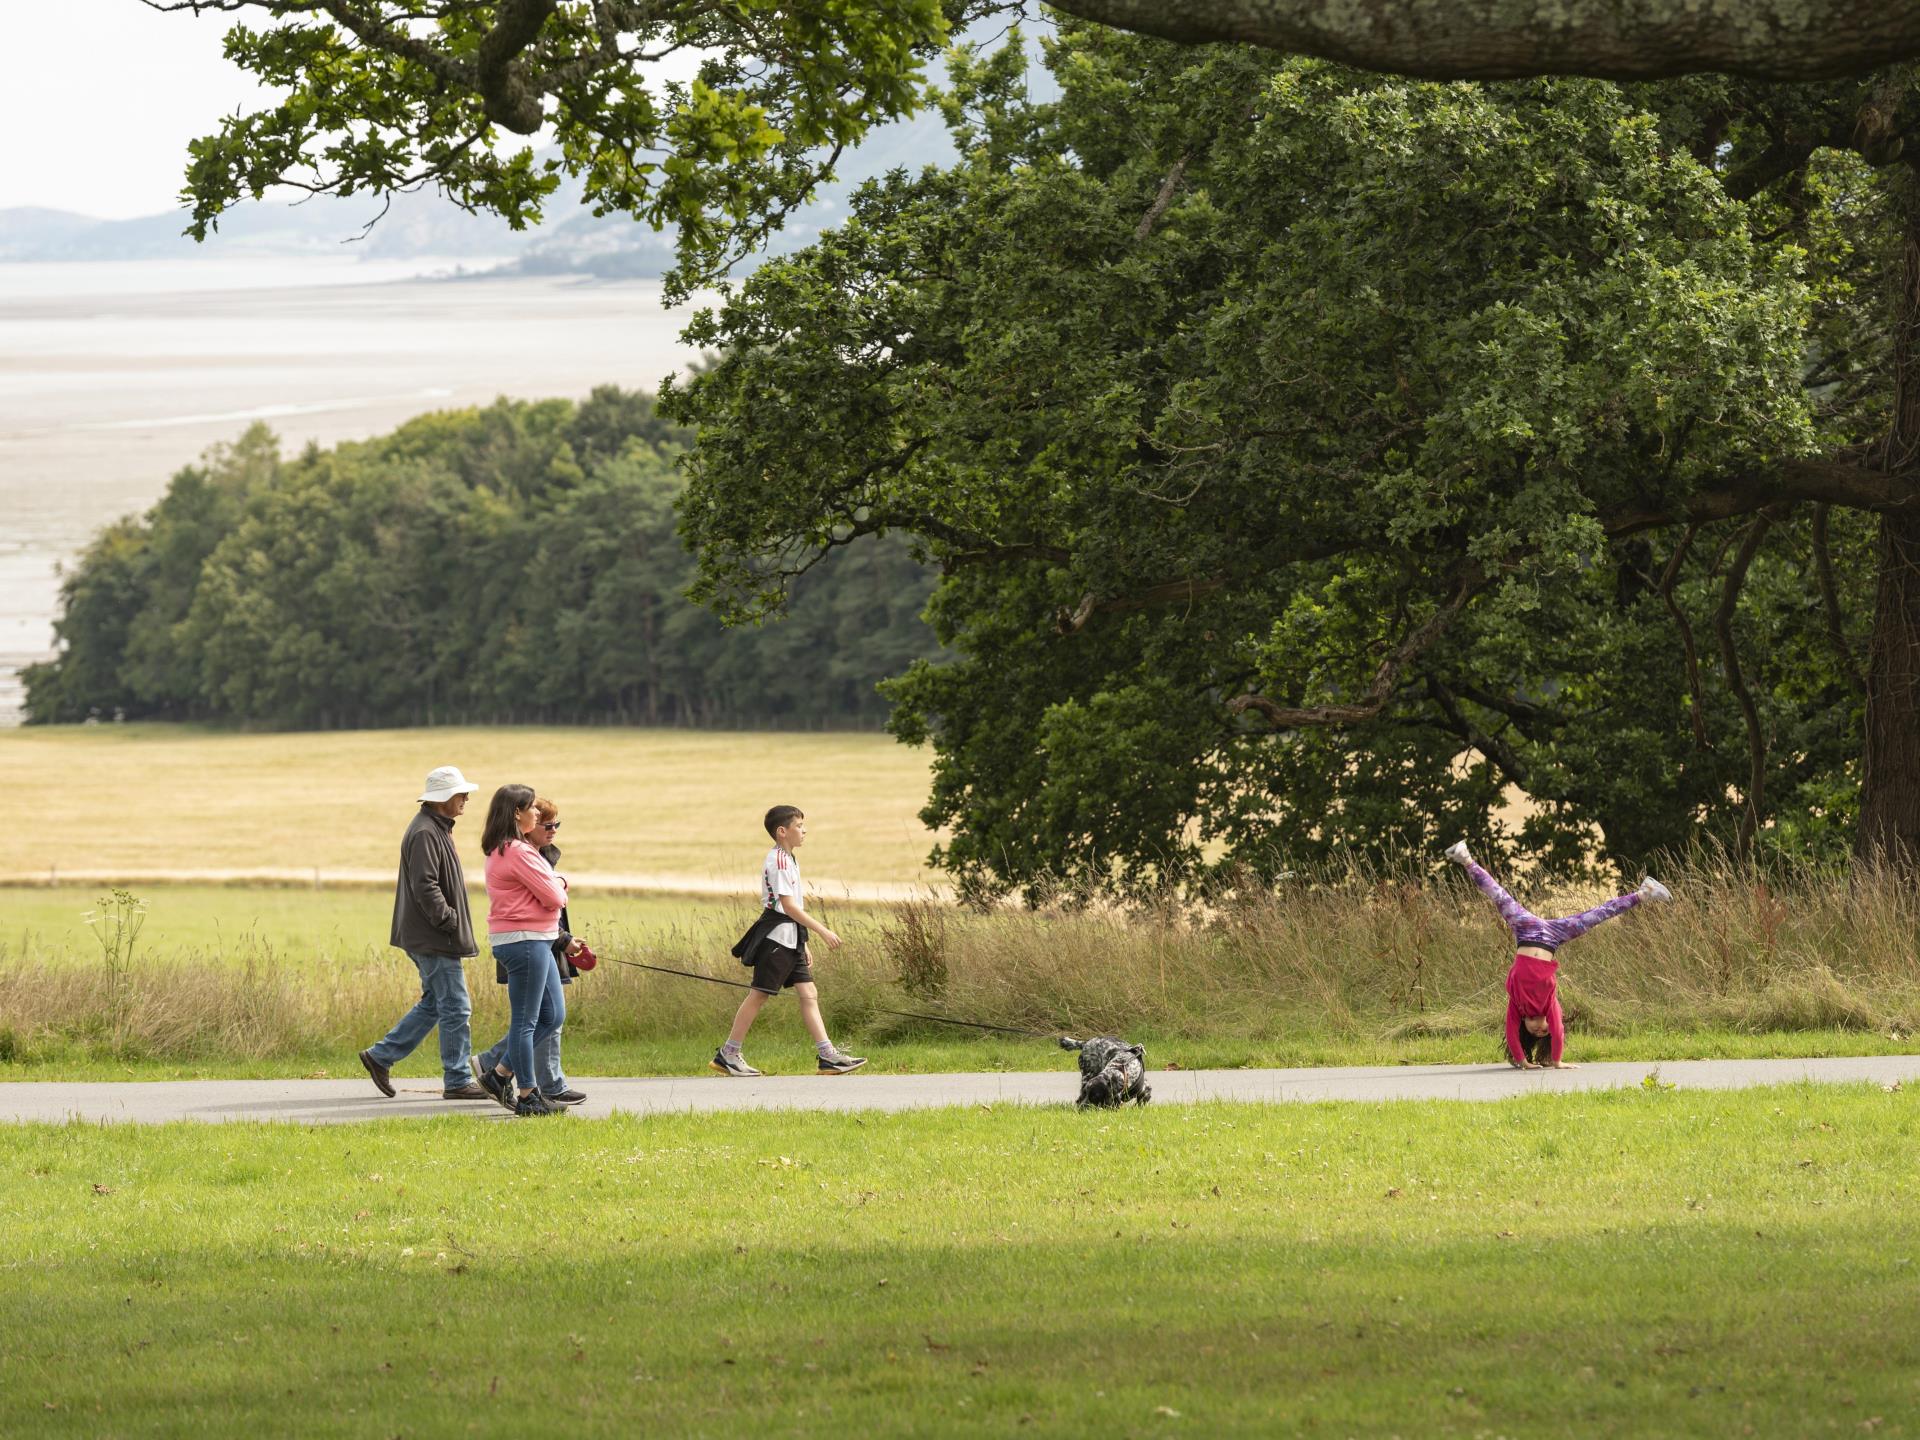 Penrhyn Castle's grounds are your playgroudns